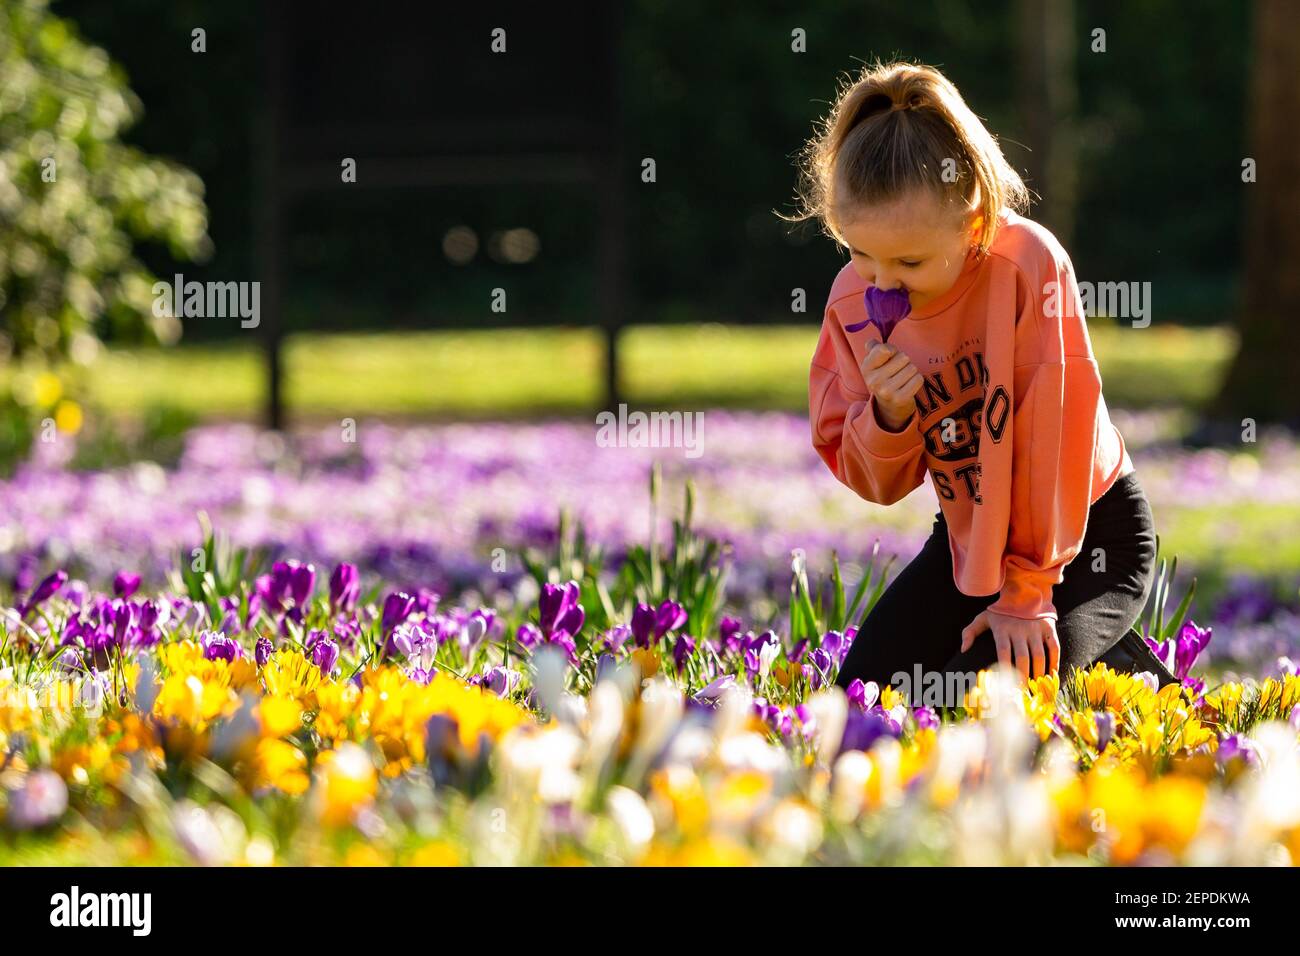 Halesowen, West Midlands, UK. 27th Feb, 2021. UK WEATHER: 8-year-old Olivia Hadlington enjoys a morning among the spring flowers in her local park in Halesowen, West Midlands on a weekend of sunny spring weather. Credit: Peter Lopeman/Alamy Live News Stock Photo